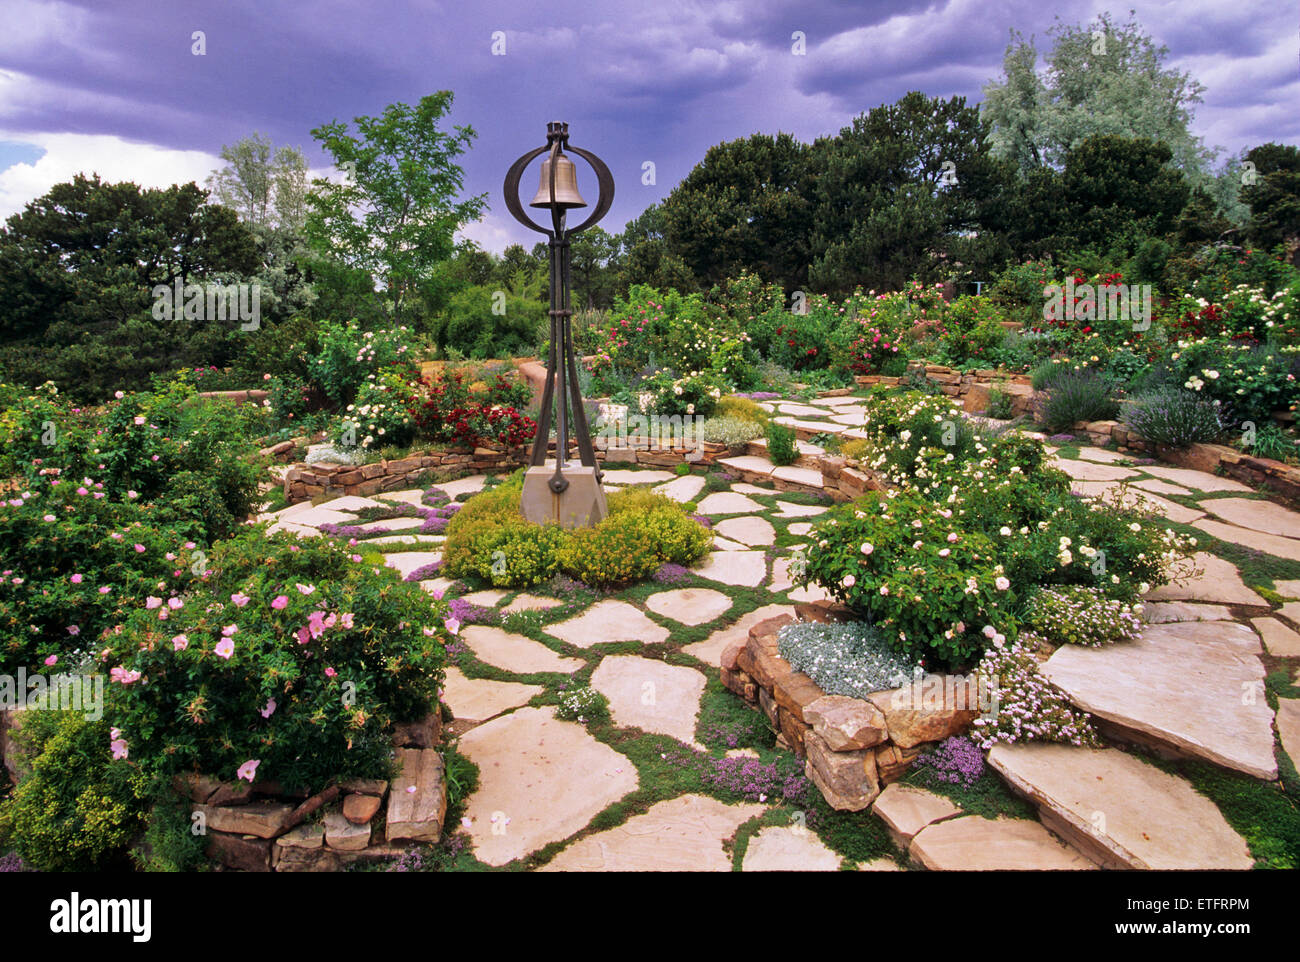 The gardens of Santa Fe,New Mexico, offer a constant supply of delightful surprises and artful delights. Stock Photo